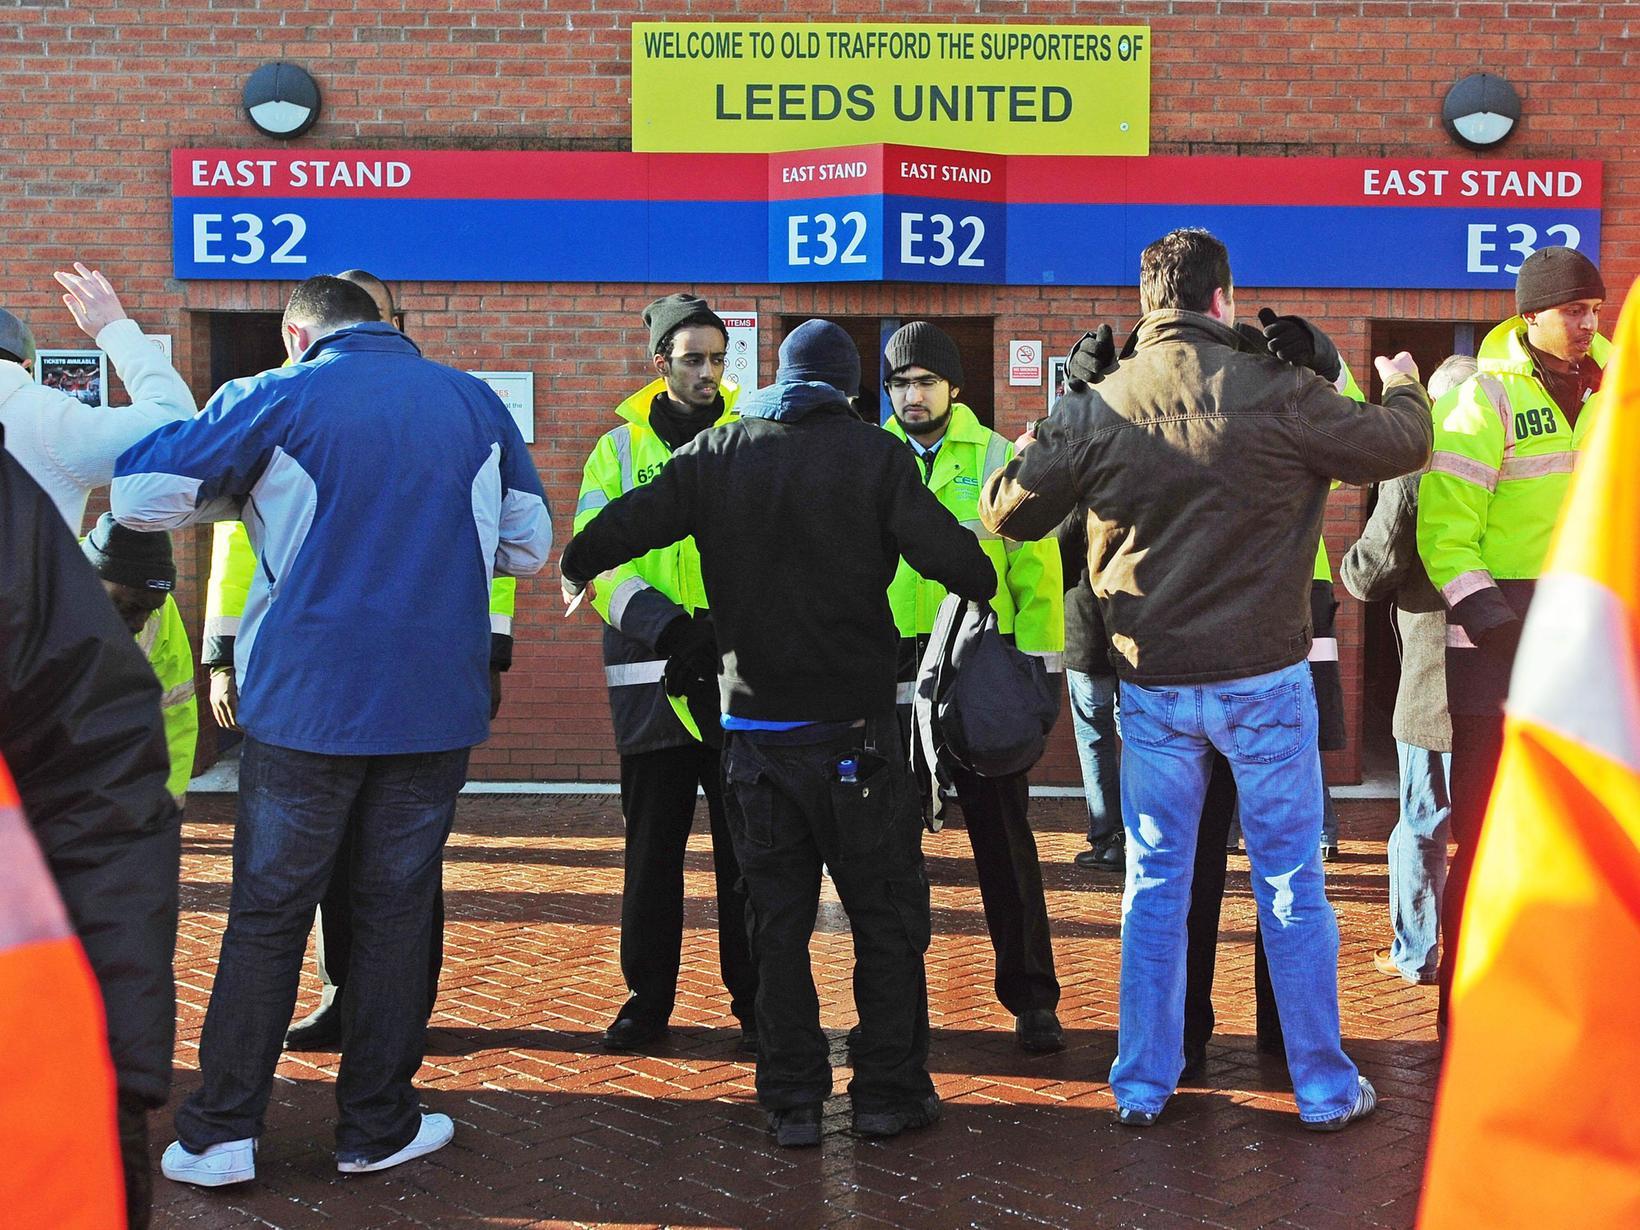 Leeds United fans are searched before entering Old Trafford.